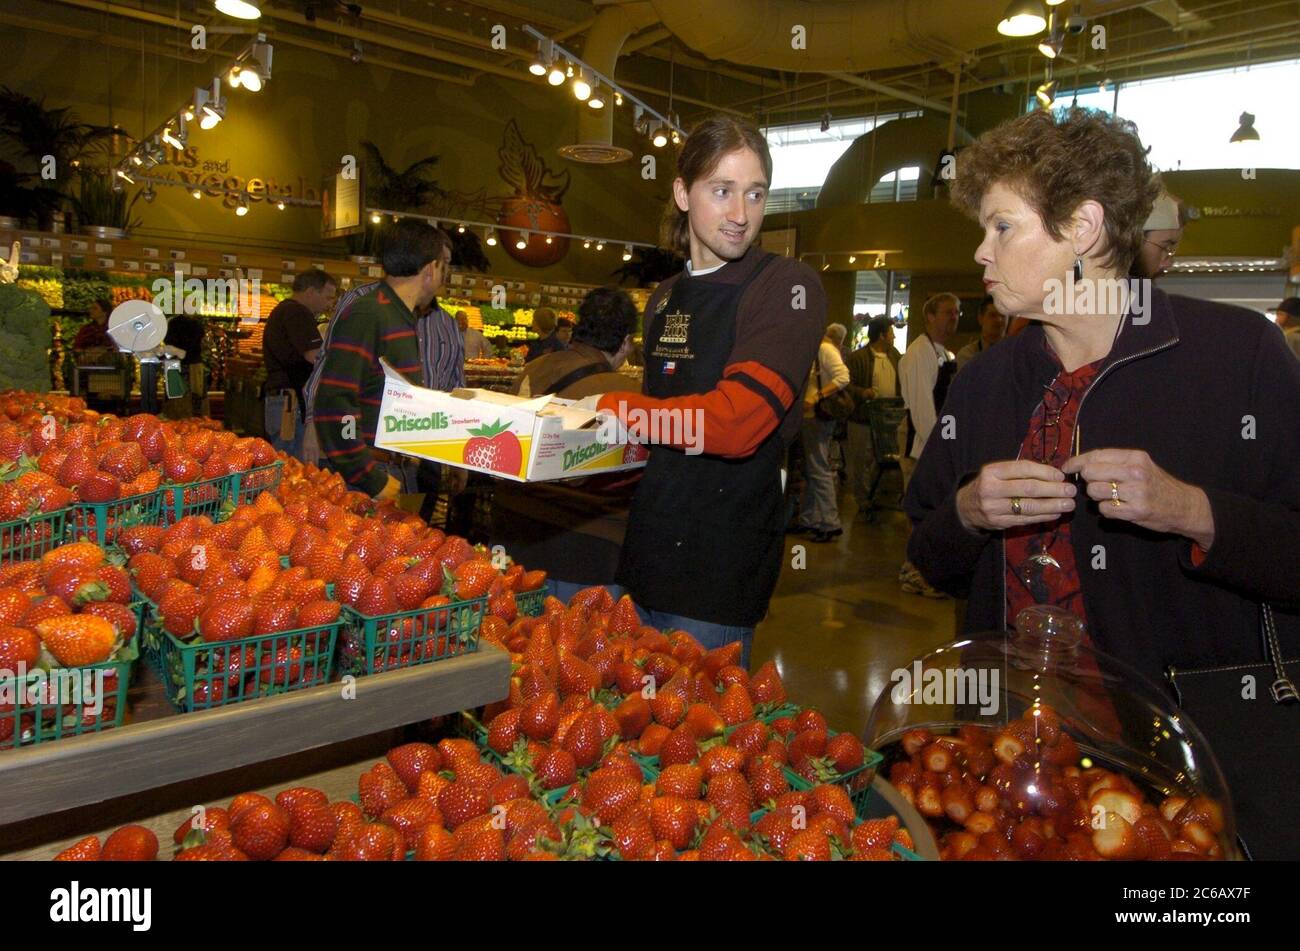 Austin, Texas USA, March 3 2005: Produce clerk talks to shopper at display of fresh strawberries during the grand opening of Whole Foods' 80,000 square-foot flagship store and corporate headquarters in Austin's emerging Market District. The national chain has 167 stores and is the world's leading natural and organic supermarkets. ©Bob Daemmrich Stock Photo